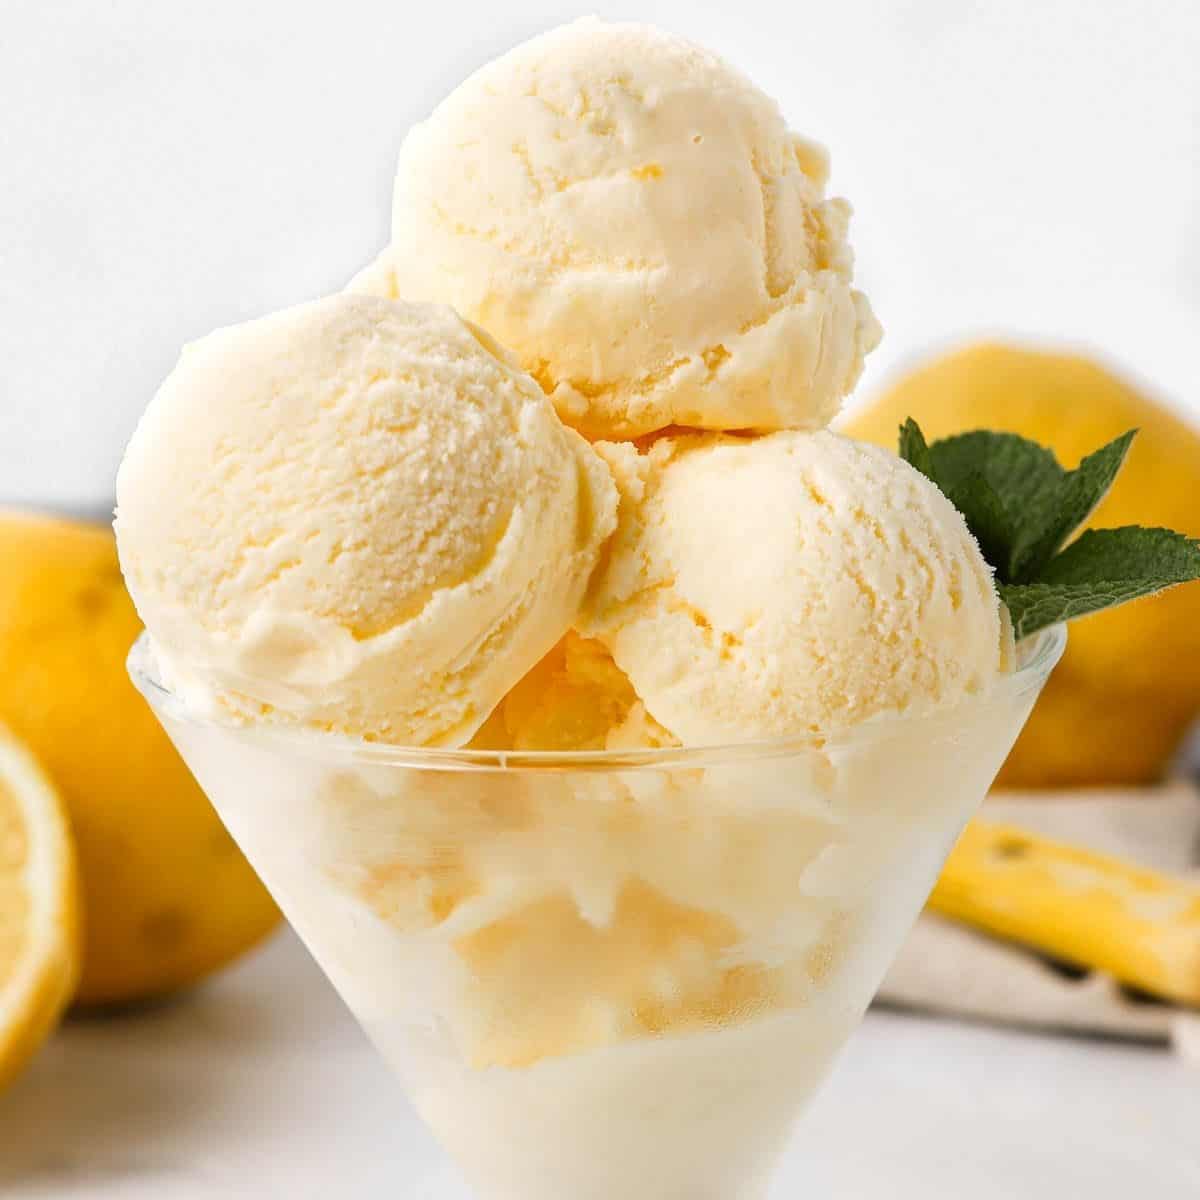 How To Make Lemon Ice Cream Without An Ice Cream Maker